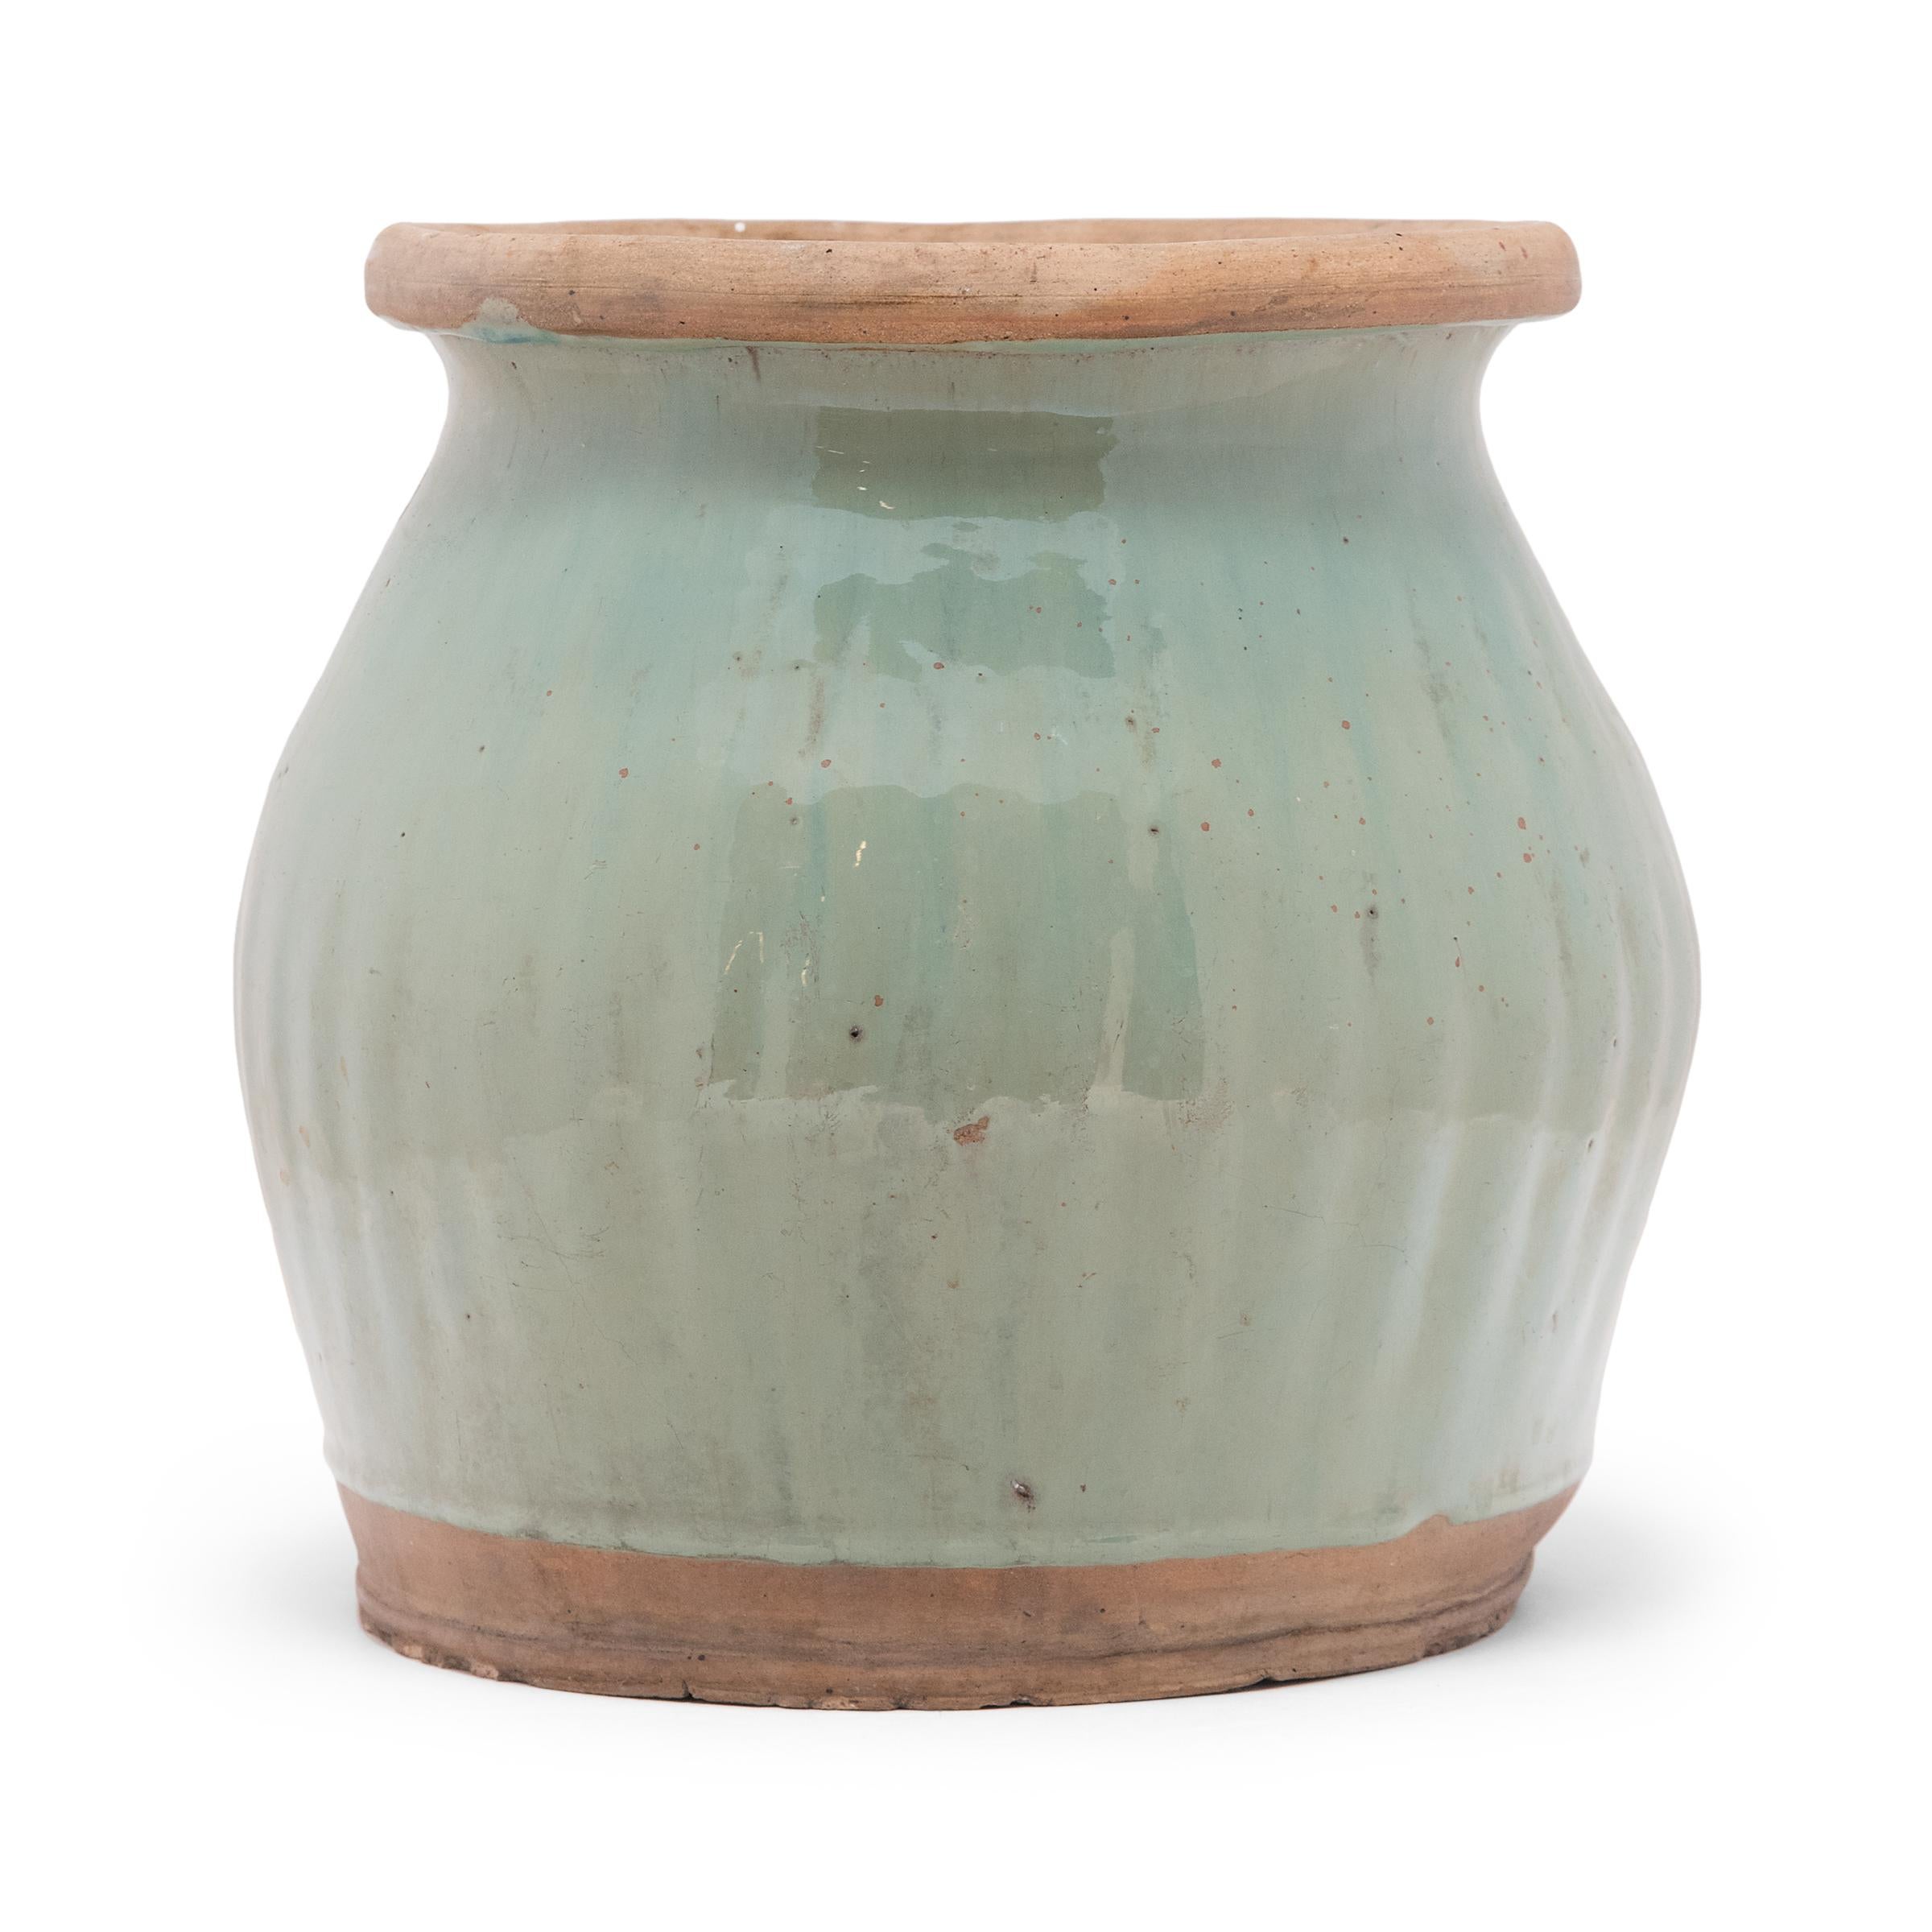 Dated to the mid-20th century, this glazed ceramic jar features a flared lip and bulbous sides textured by a pattern of ridges. A celadon-green glaze evenly coats the swelling sides, dotted with pitted wear and subtle streaks of blue. The top